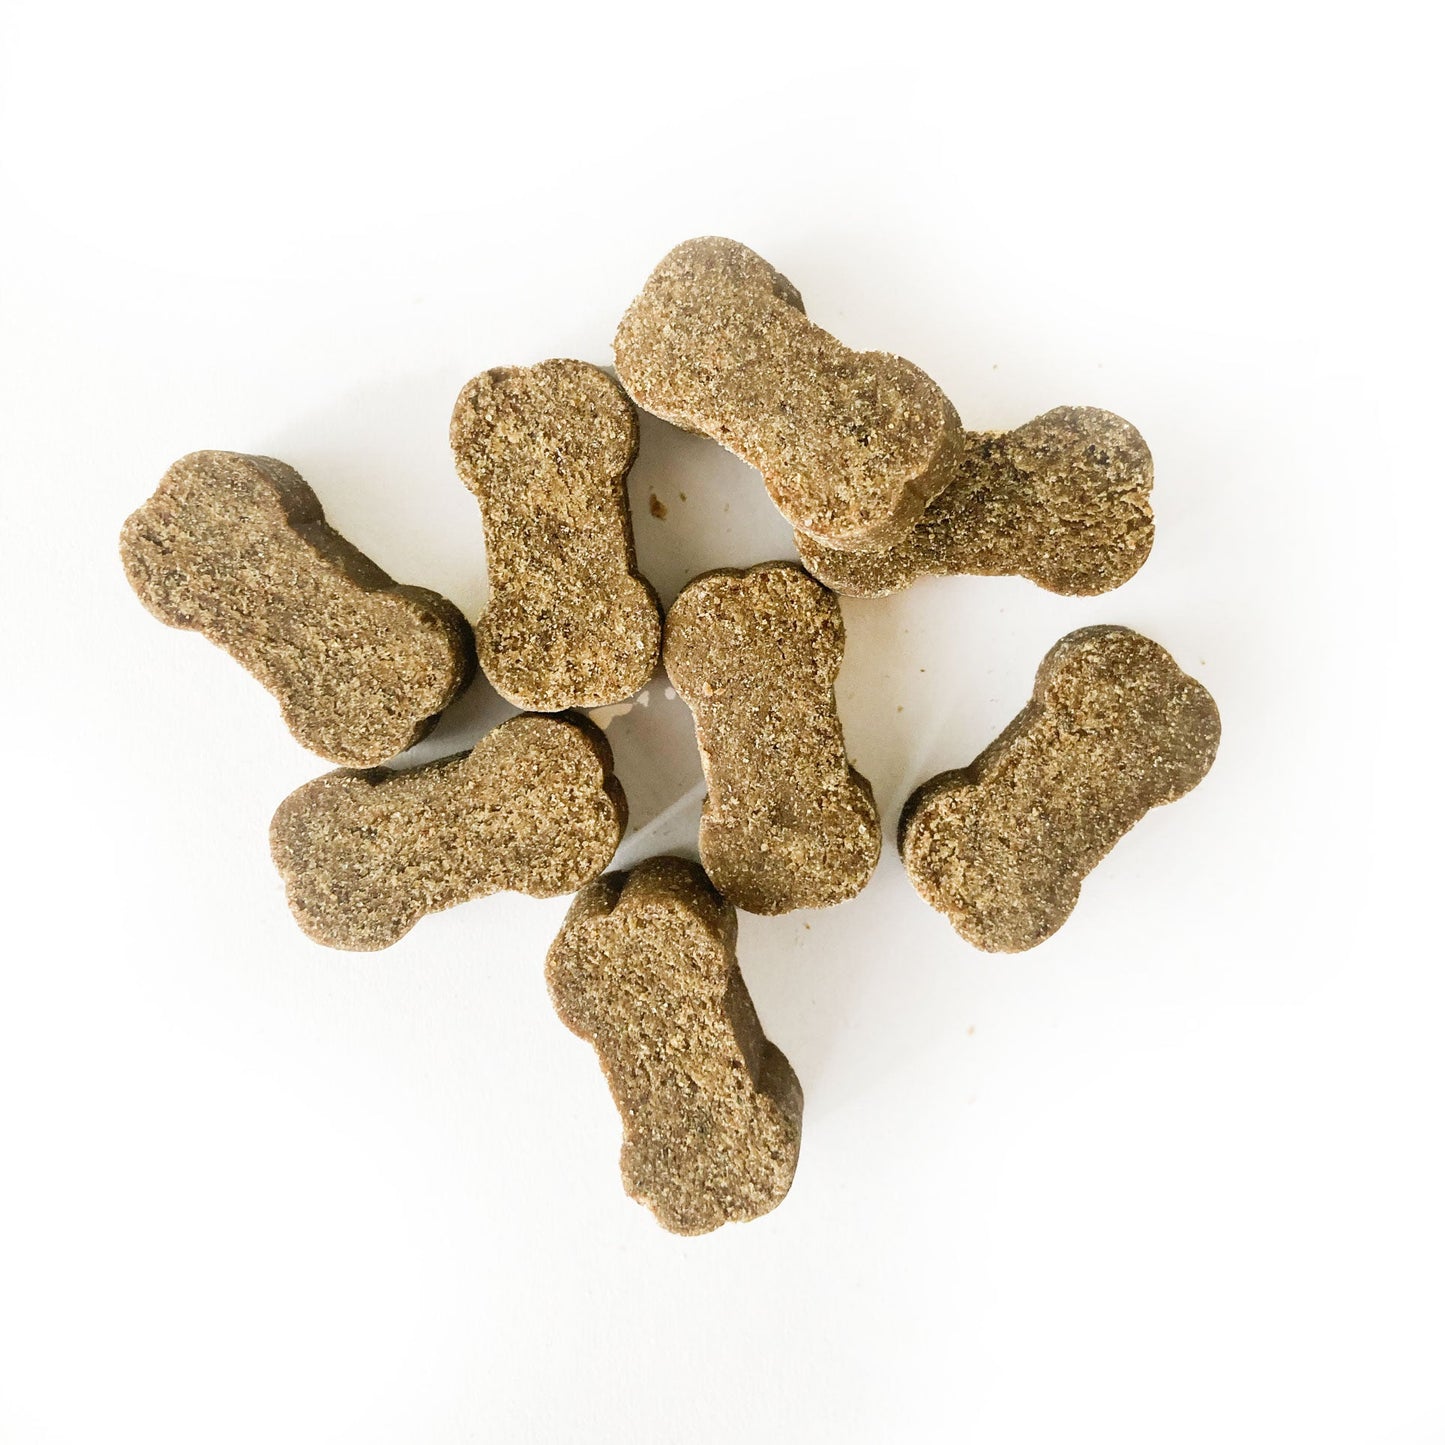 Nutritious soft chews for dogs - supplements 100% natural. Hip & Joint Puppy Soft Chews supporting mobility in dogs and puppies. Hip and joint soft chews  mobility supplement for puppy health. With GlycOmega-PLUS green-lipped mussel powder. For small or young dogs. Joint support with green-lipped mussel powder. Rich in omega 3, chondroitin and glucosamine for dogs and young puppies.. Rich in Omega3, glucosamine and chondroitin. 